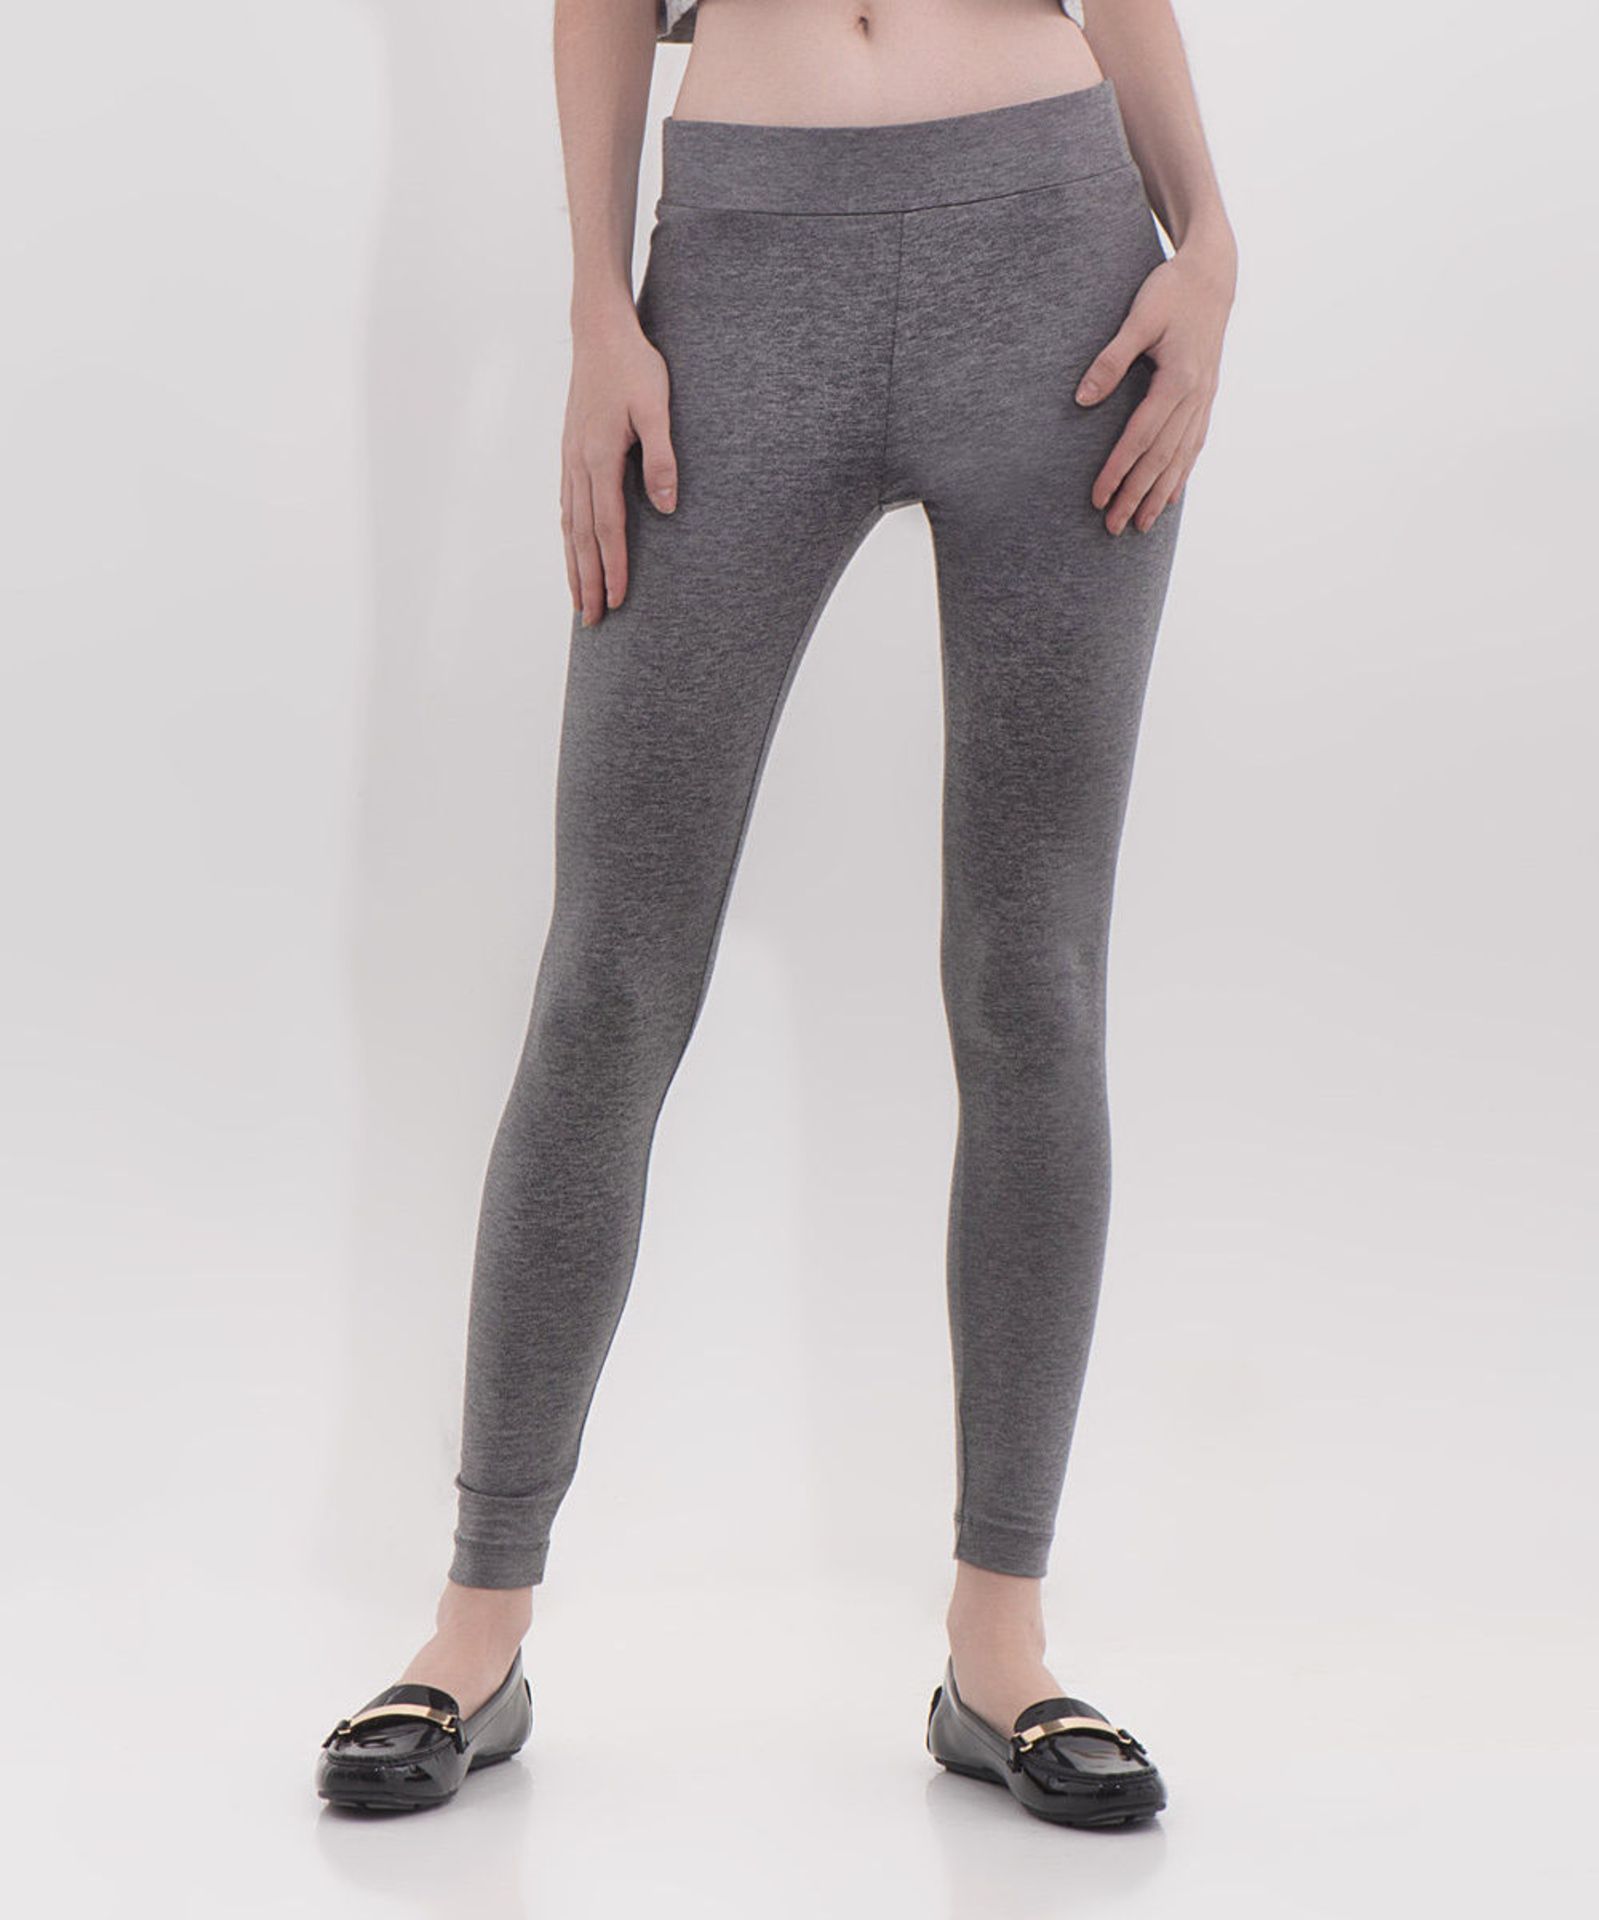 BLUBERRY DENIM Gray Melange Leggings (Uk Size 16:Us Size 12) (New with tags) [Ref: 31402404- T-104]